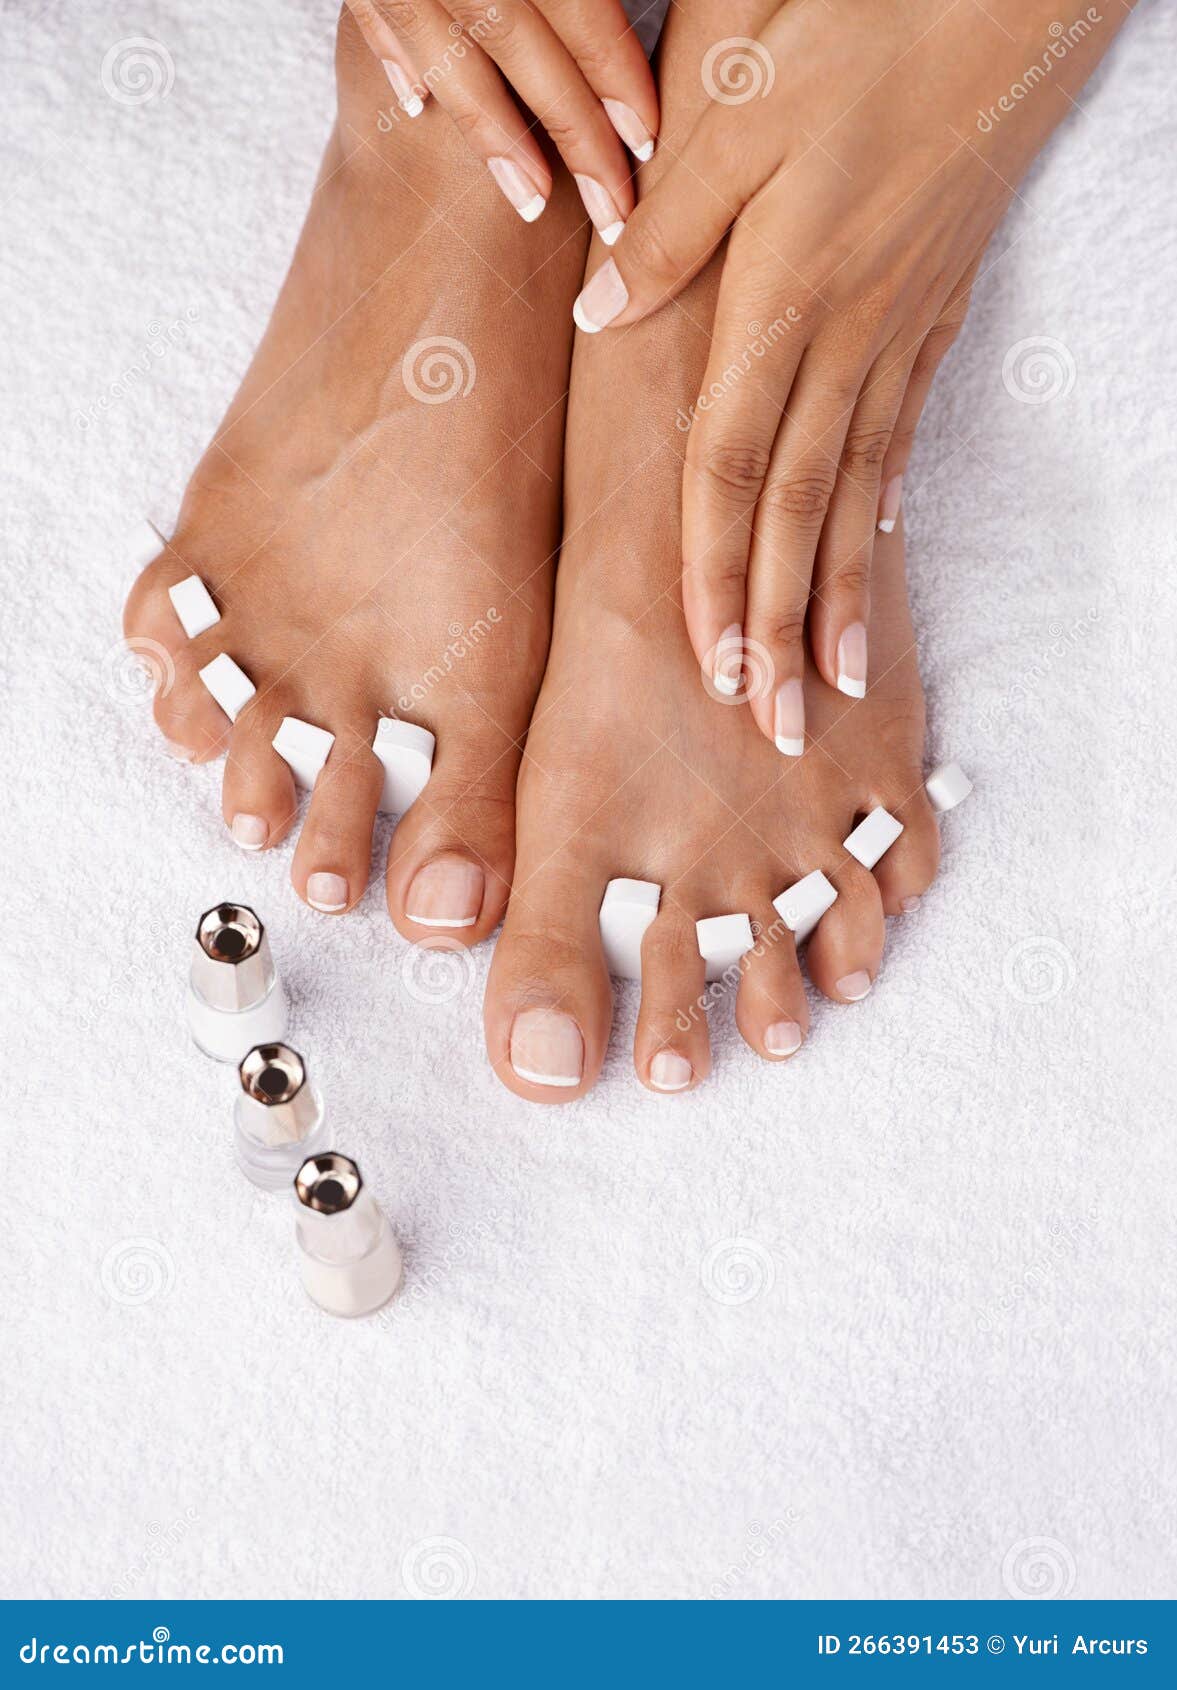 Hands & Feet - Pedicure and Manicure Cheshire